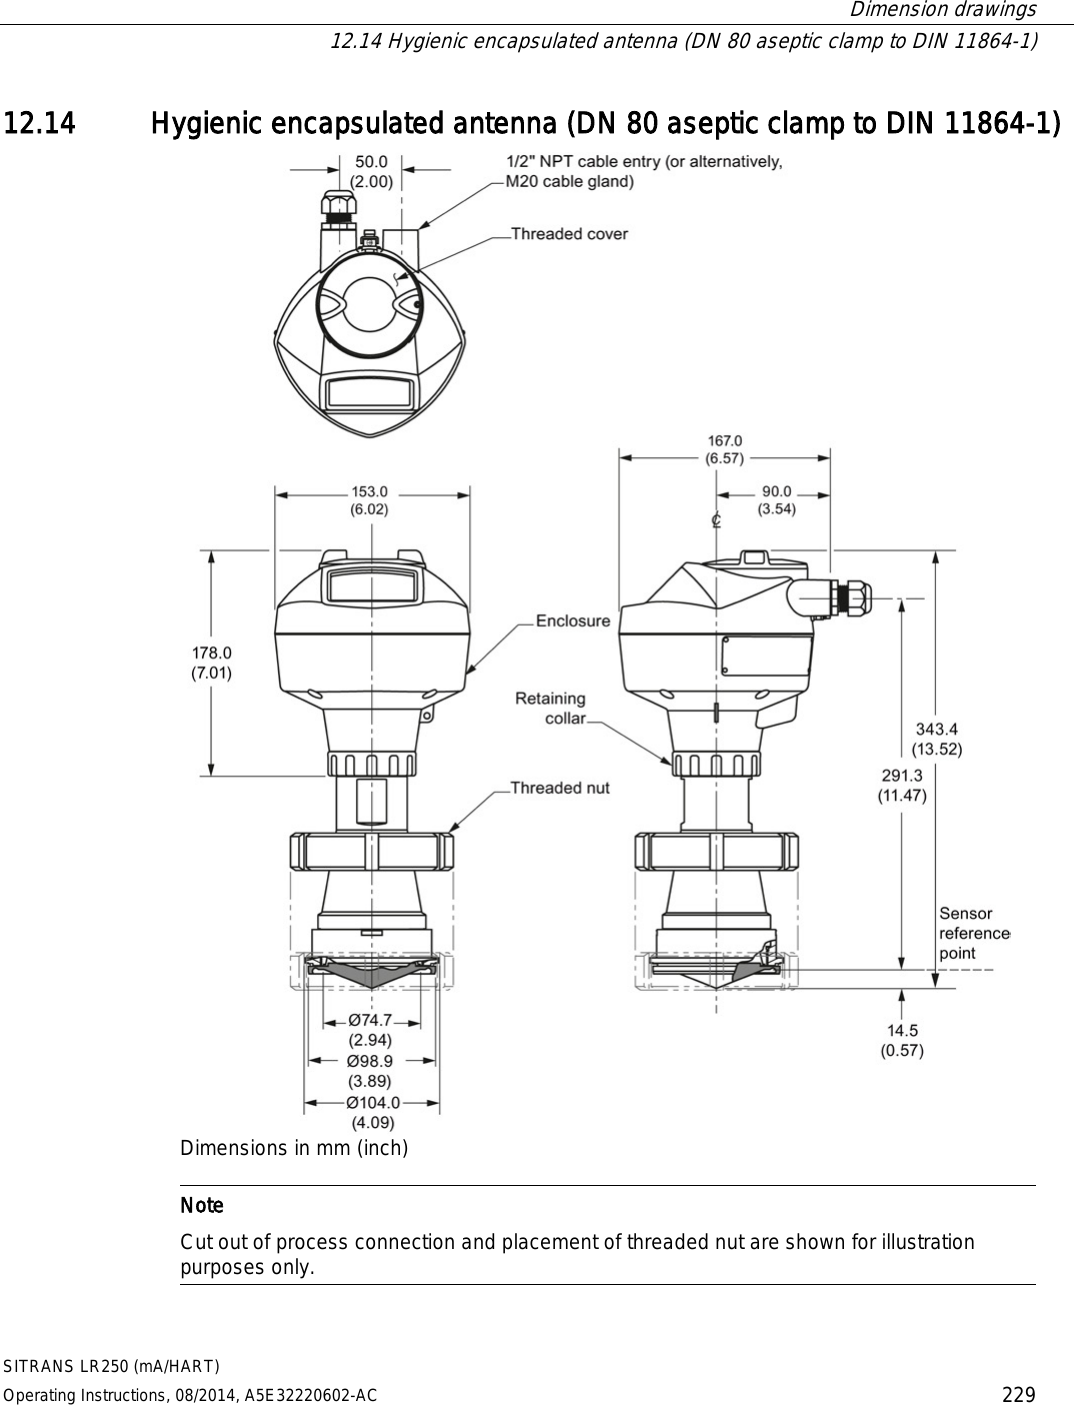  Dimension drawings  12.14 Hygienic encapsulated antenna (DN 80 aseptic clamp to DIN 11864-1) SITRANS LR250 (mA/HART) Operating Instructions, 08/2014, A5E32220602-AC 229 12.14 Hygienic encapsulated antenna (DN 80 aseptic clamp to DIN 11864-1)  Dimensions in mm (inch)   Note Cut out of process connection and placement of threaded nut are shown for illustration purposes only.  